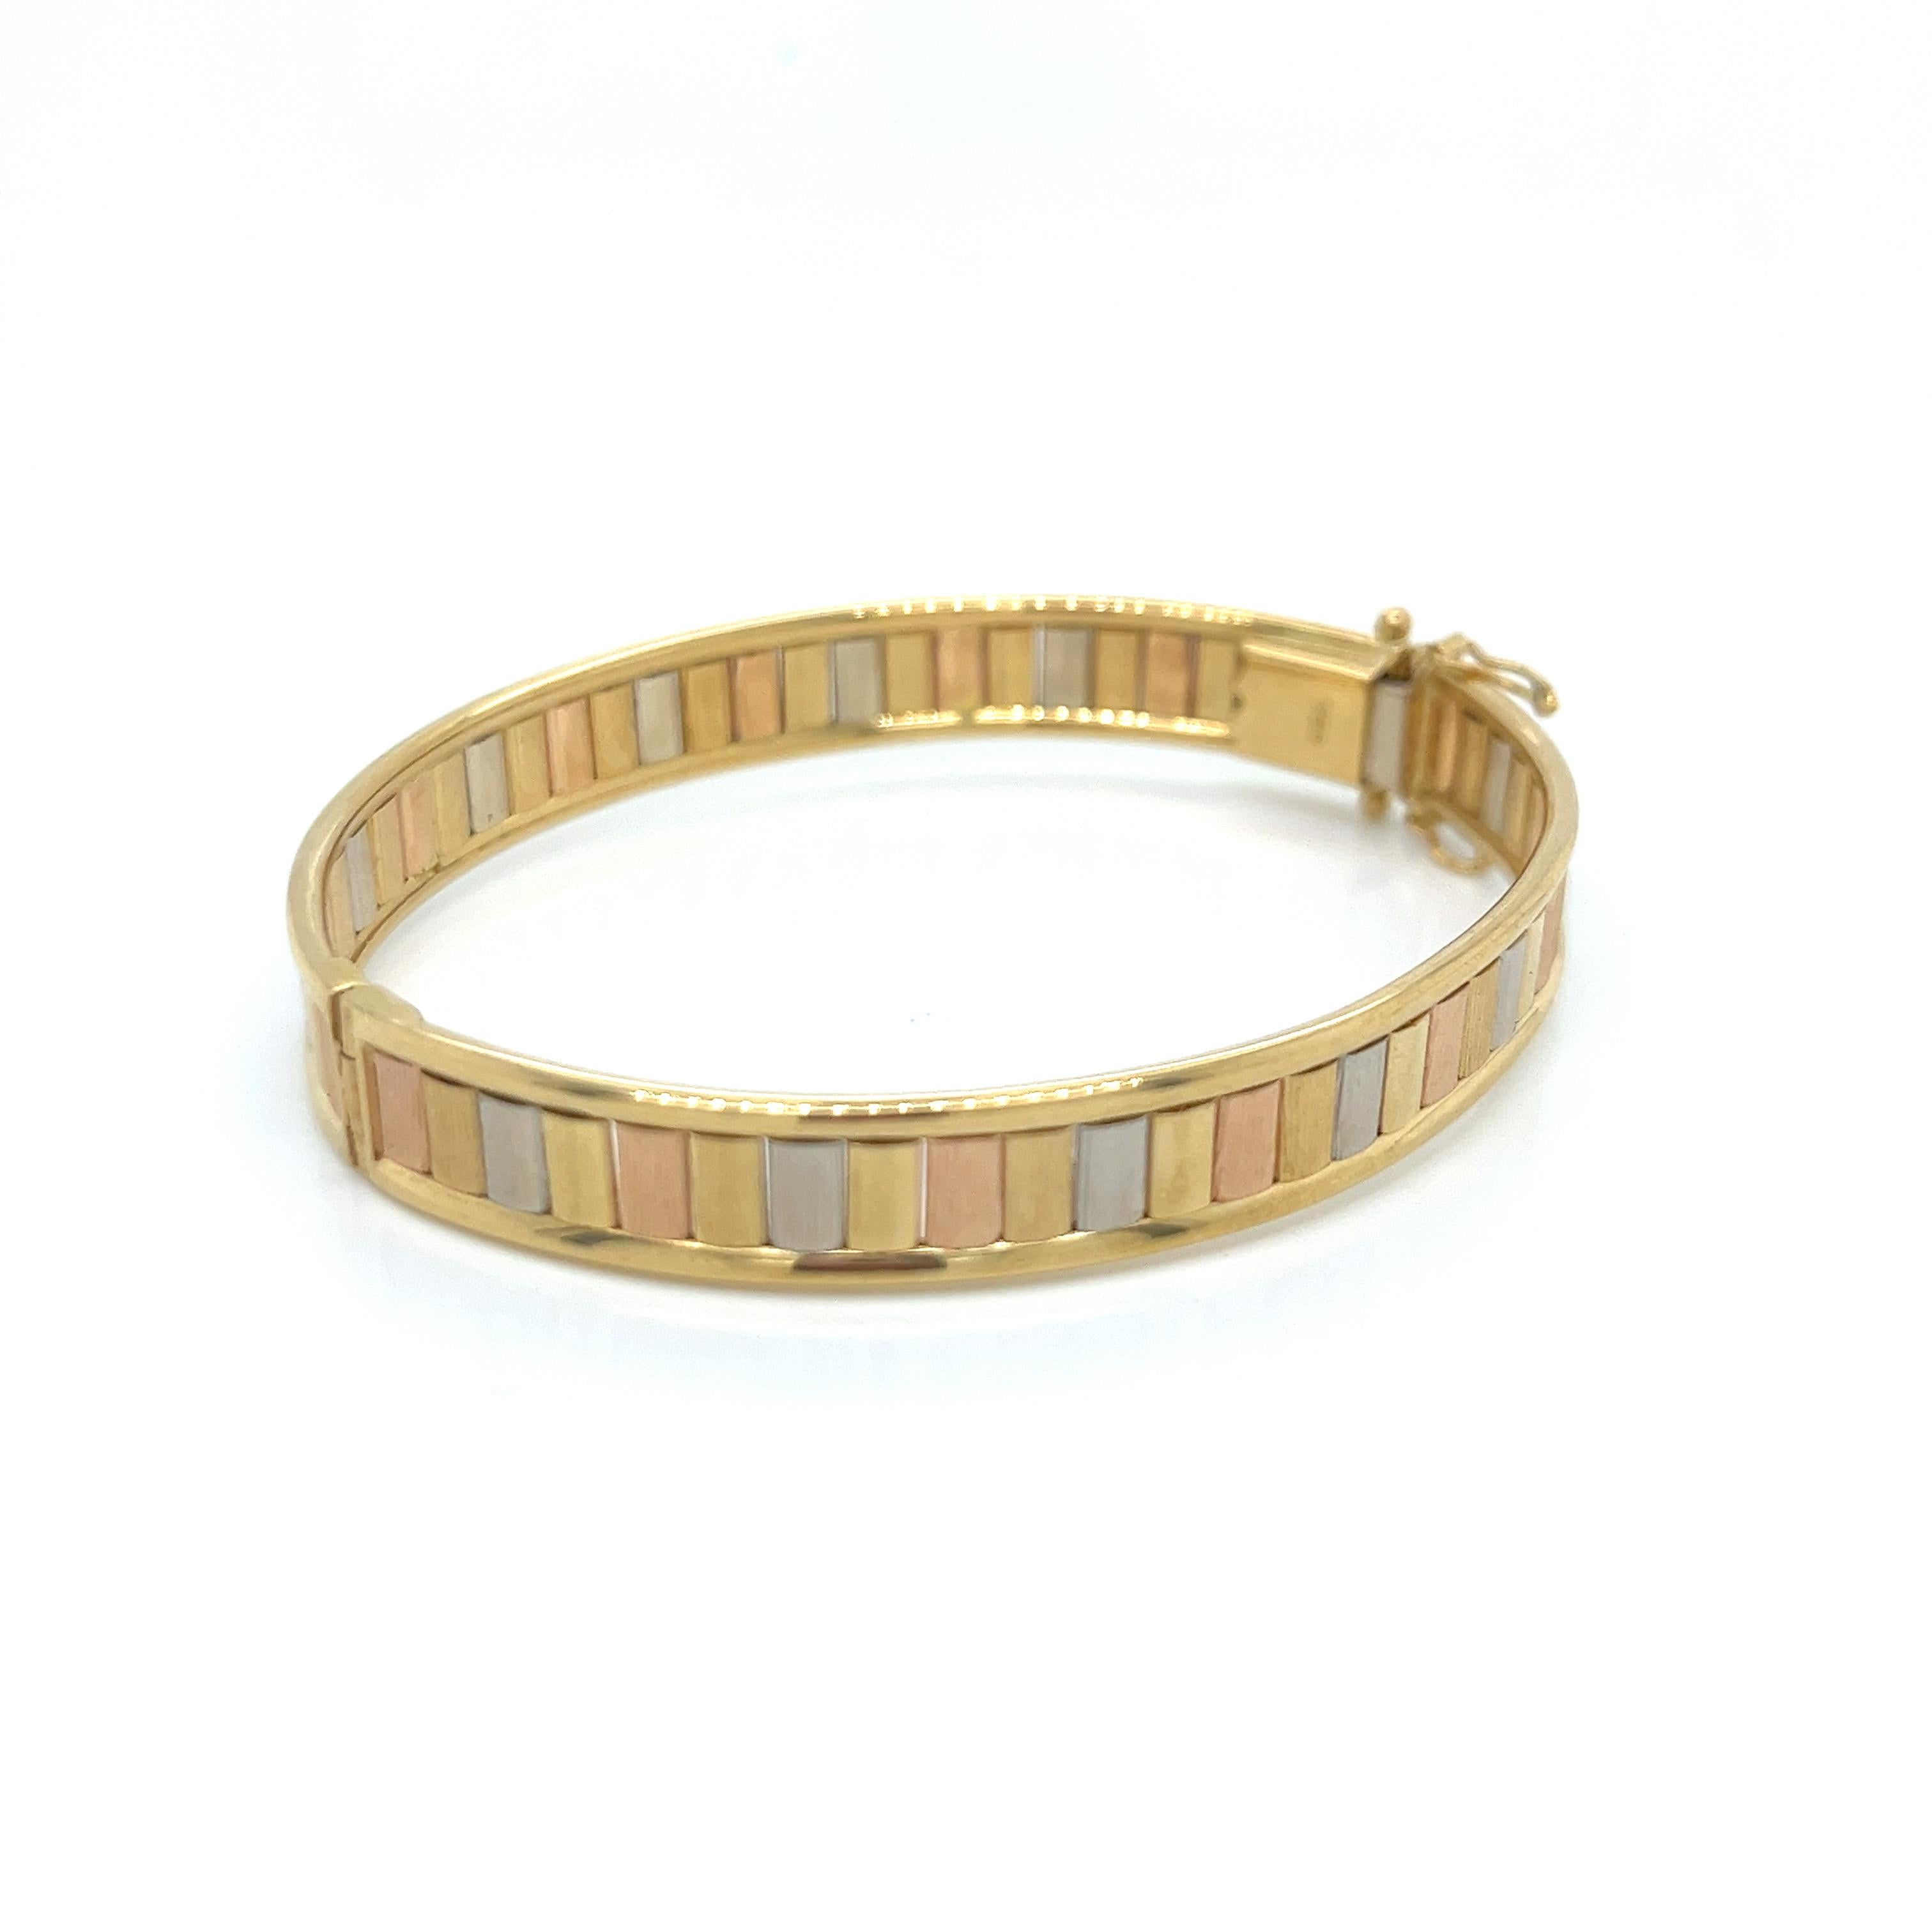 This stunning vintage bangle bracelet is a true masterpiece, showcasing exceptional craftsmanship and artistic flair. Crafted from luxurious 18k gold, verified by the 750 stamp, the design features a harmonious blend of rose, white, and yellow gold